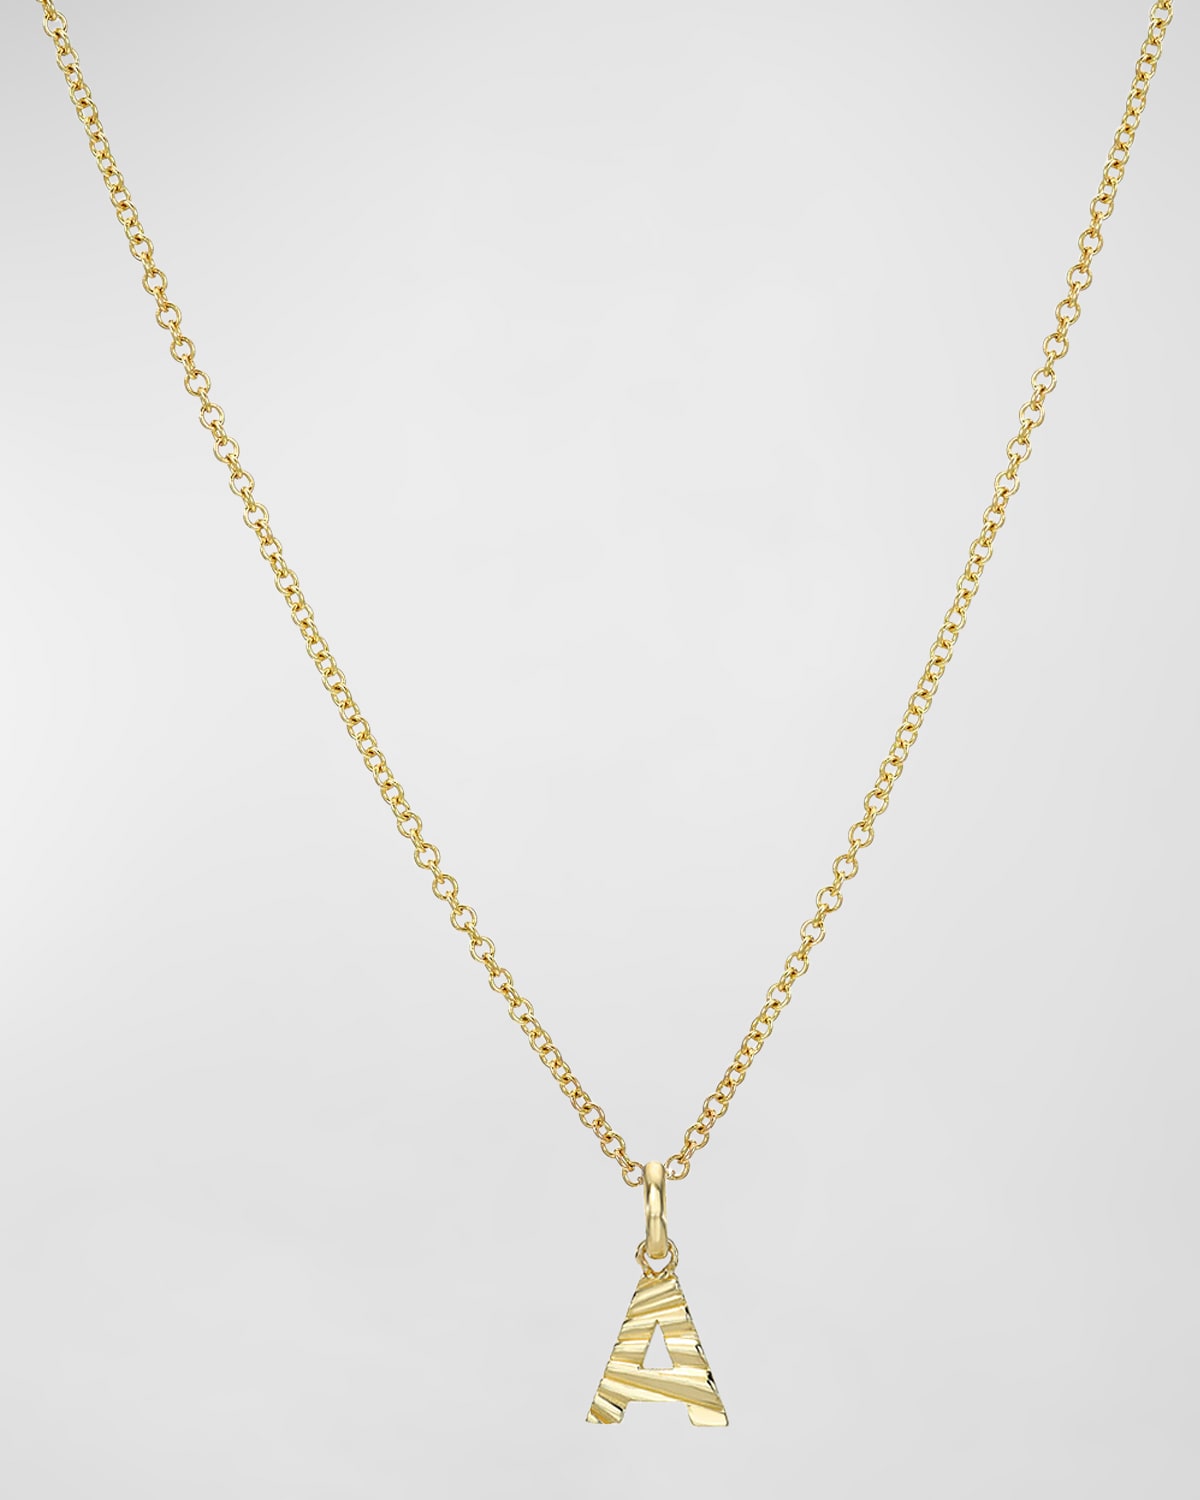 Zoe Lev Jewelry 14k Gold Initial Pendant Necklace In A